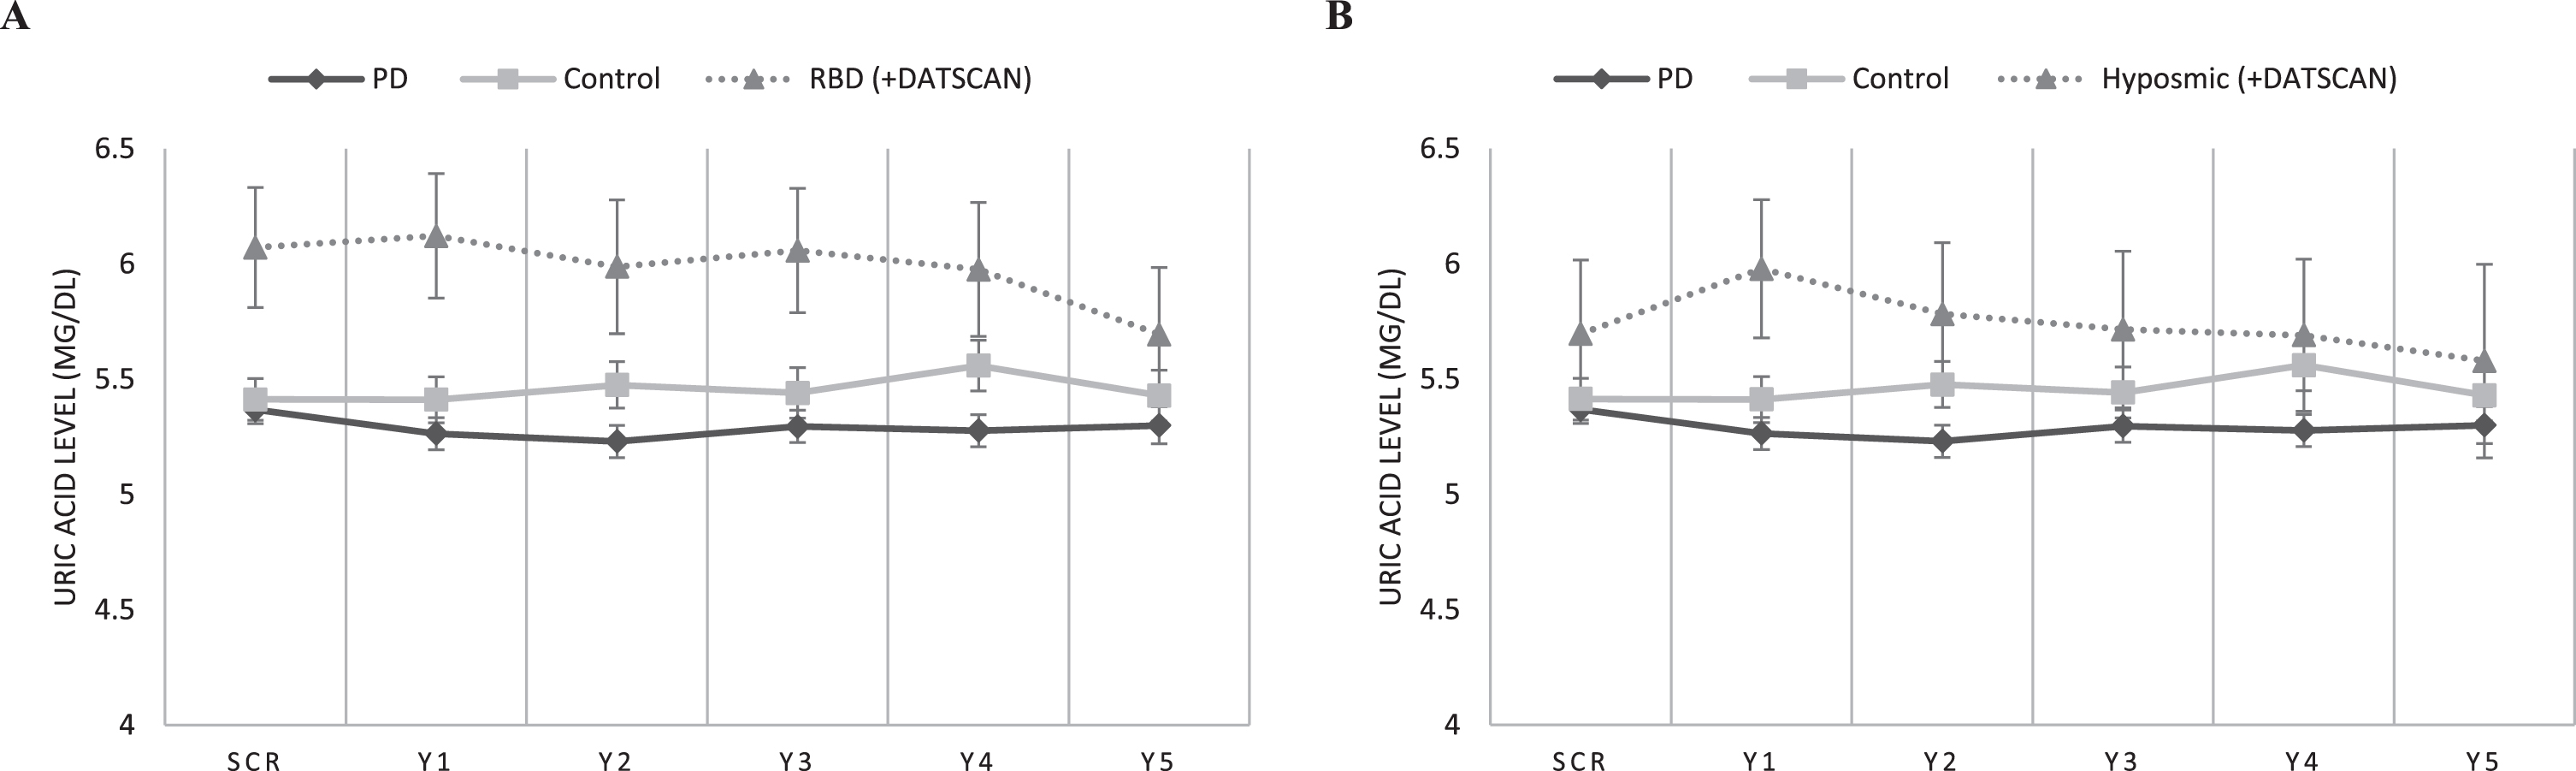 Longitudinal measurements of serum uric acid levels in: A) the RBD cohort vs. idiopathic PD and healthy controls, and B) the Hyposmic cohort vs. idiopathic PD and healthy controls. Statistical analysis has been performed using repeated measures linear ANCOVA (with age, sex, BMI, and presence of hypertension/gout as covariates). PPMI timepoints of visits SCR, V04, V06, V08, V10 and V12 correspond to Years 0, 1, 2, 3, 4, and 5, respectively. Error bars represent Standard Error of Mean.